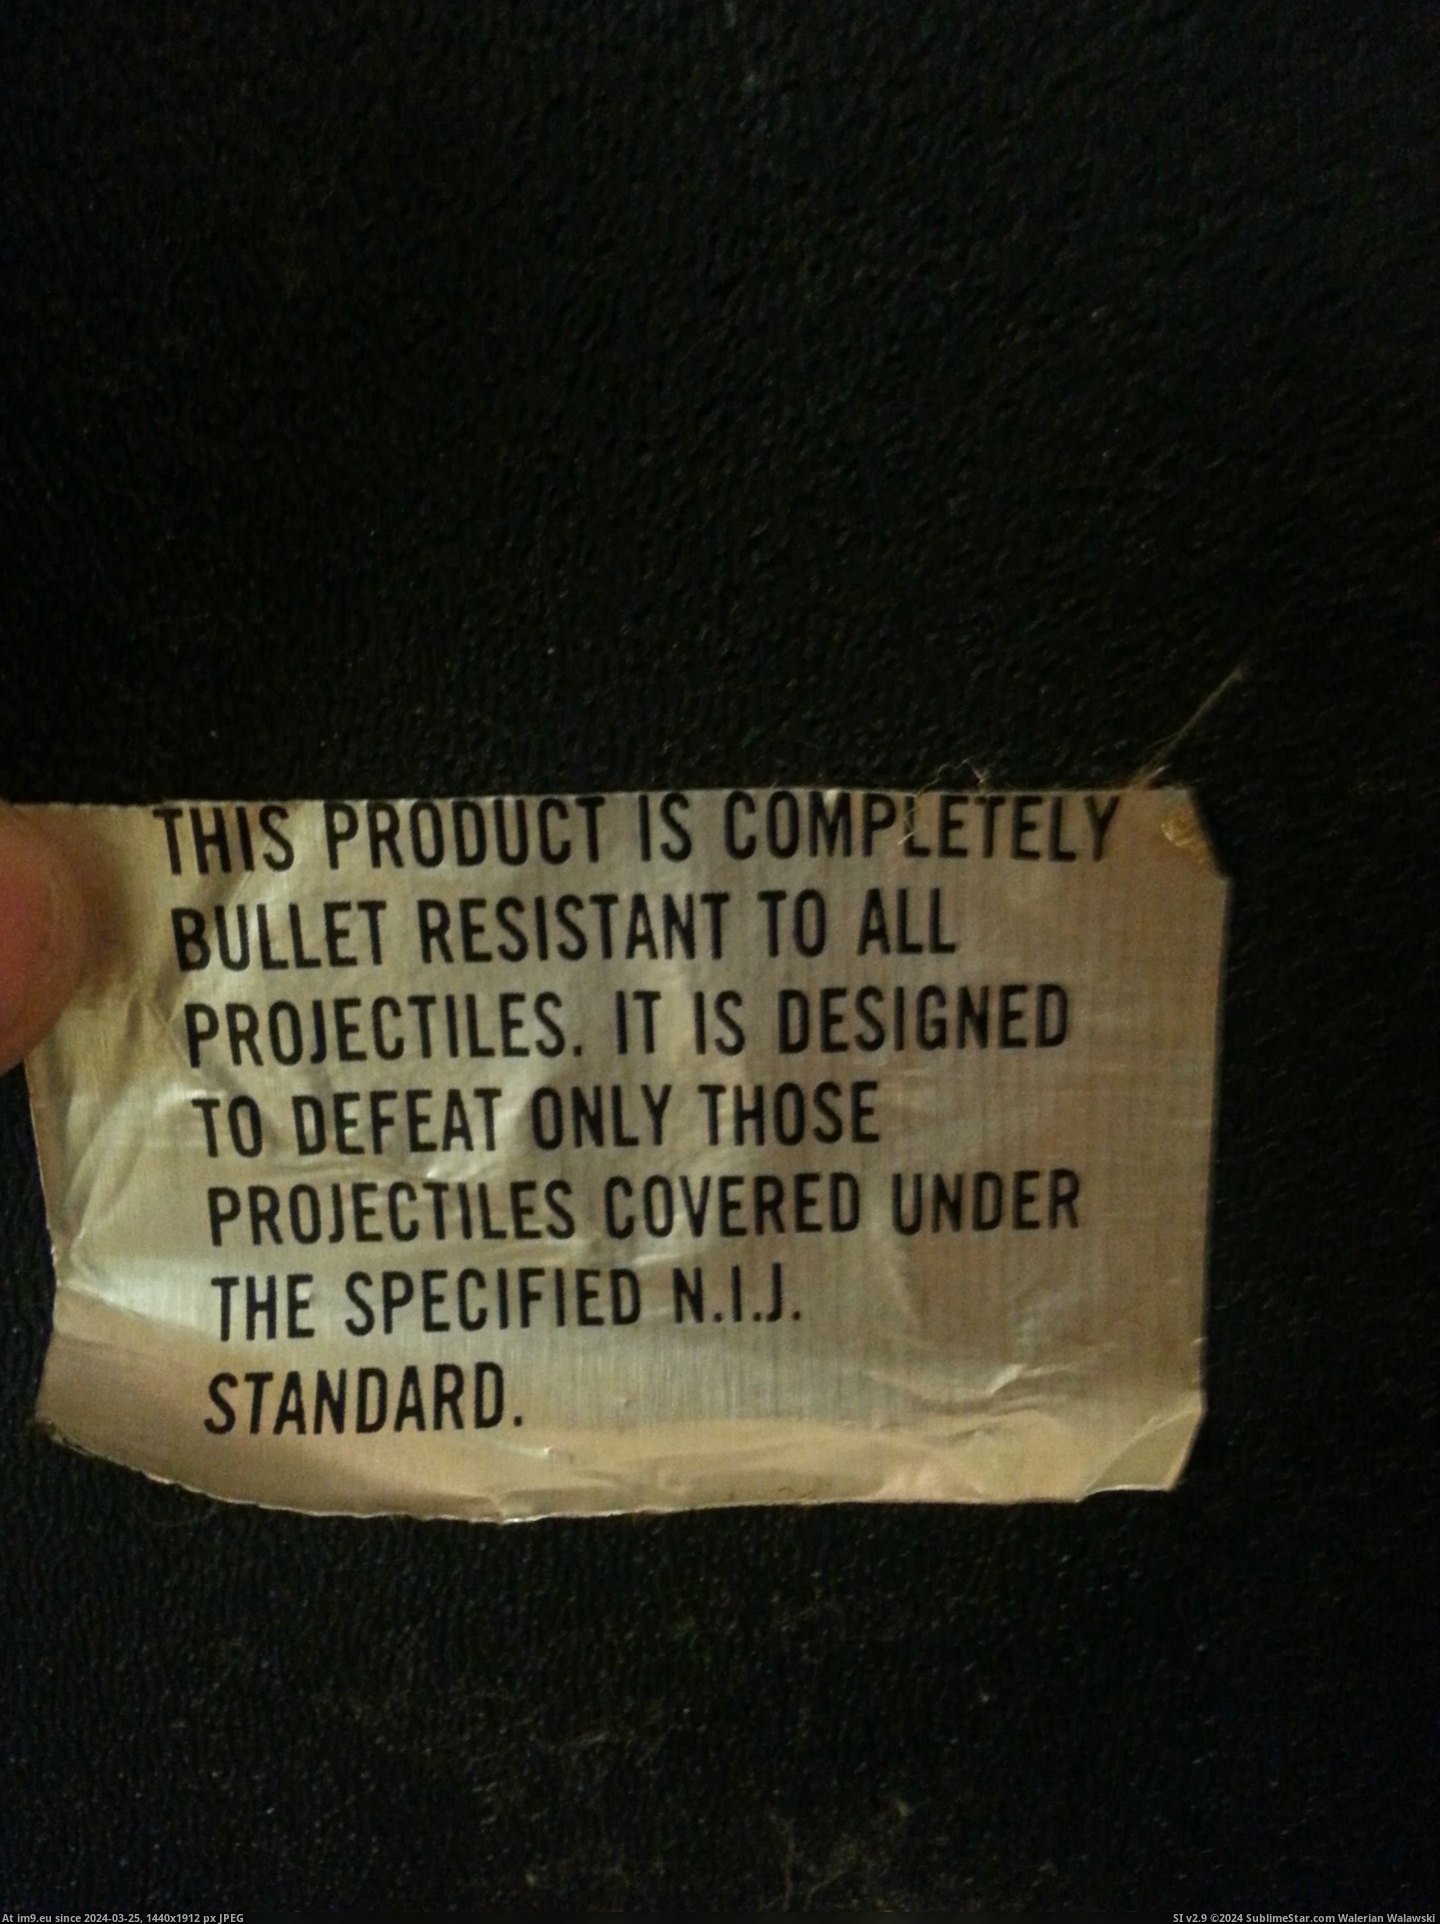 #Awesome #Find #Give #Riot #Shield #Resistant #Completely #Bullet #Goodwill [Pics] My awesome $40 Goodwill find: 'Completely bullet resistant' riot shield. Who would give this away? 3 Pic. (Изображение из альбом My r/PICS favs))